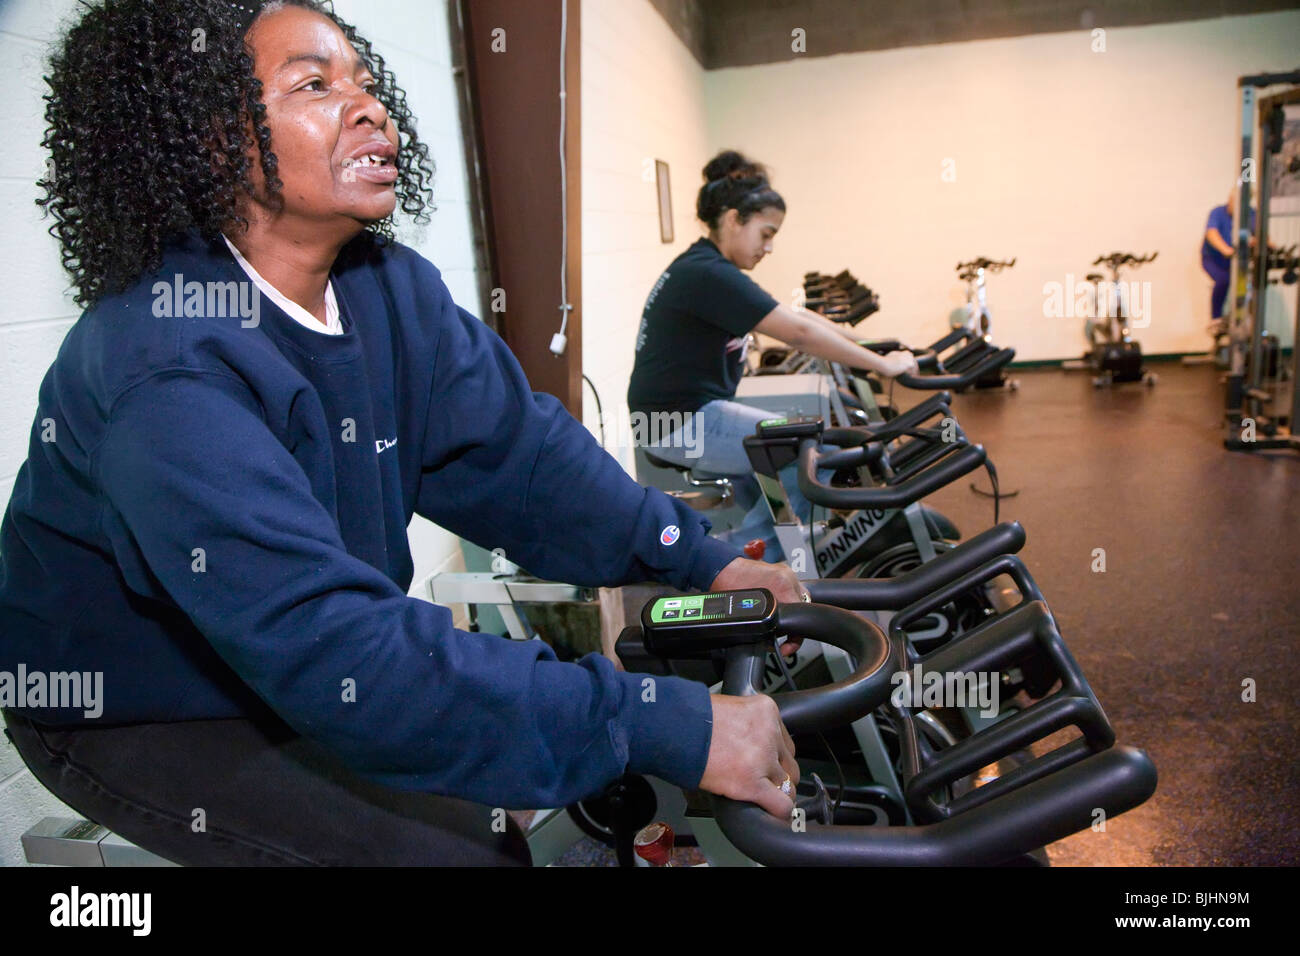 Exercise Bikes in Gym Shelter "Green" Electricity Stock Photo - Alamy